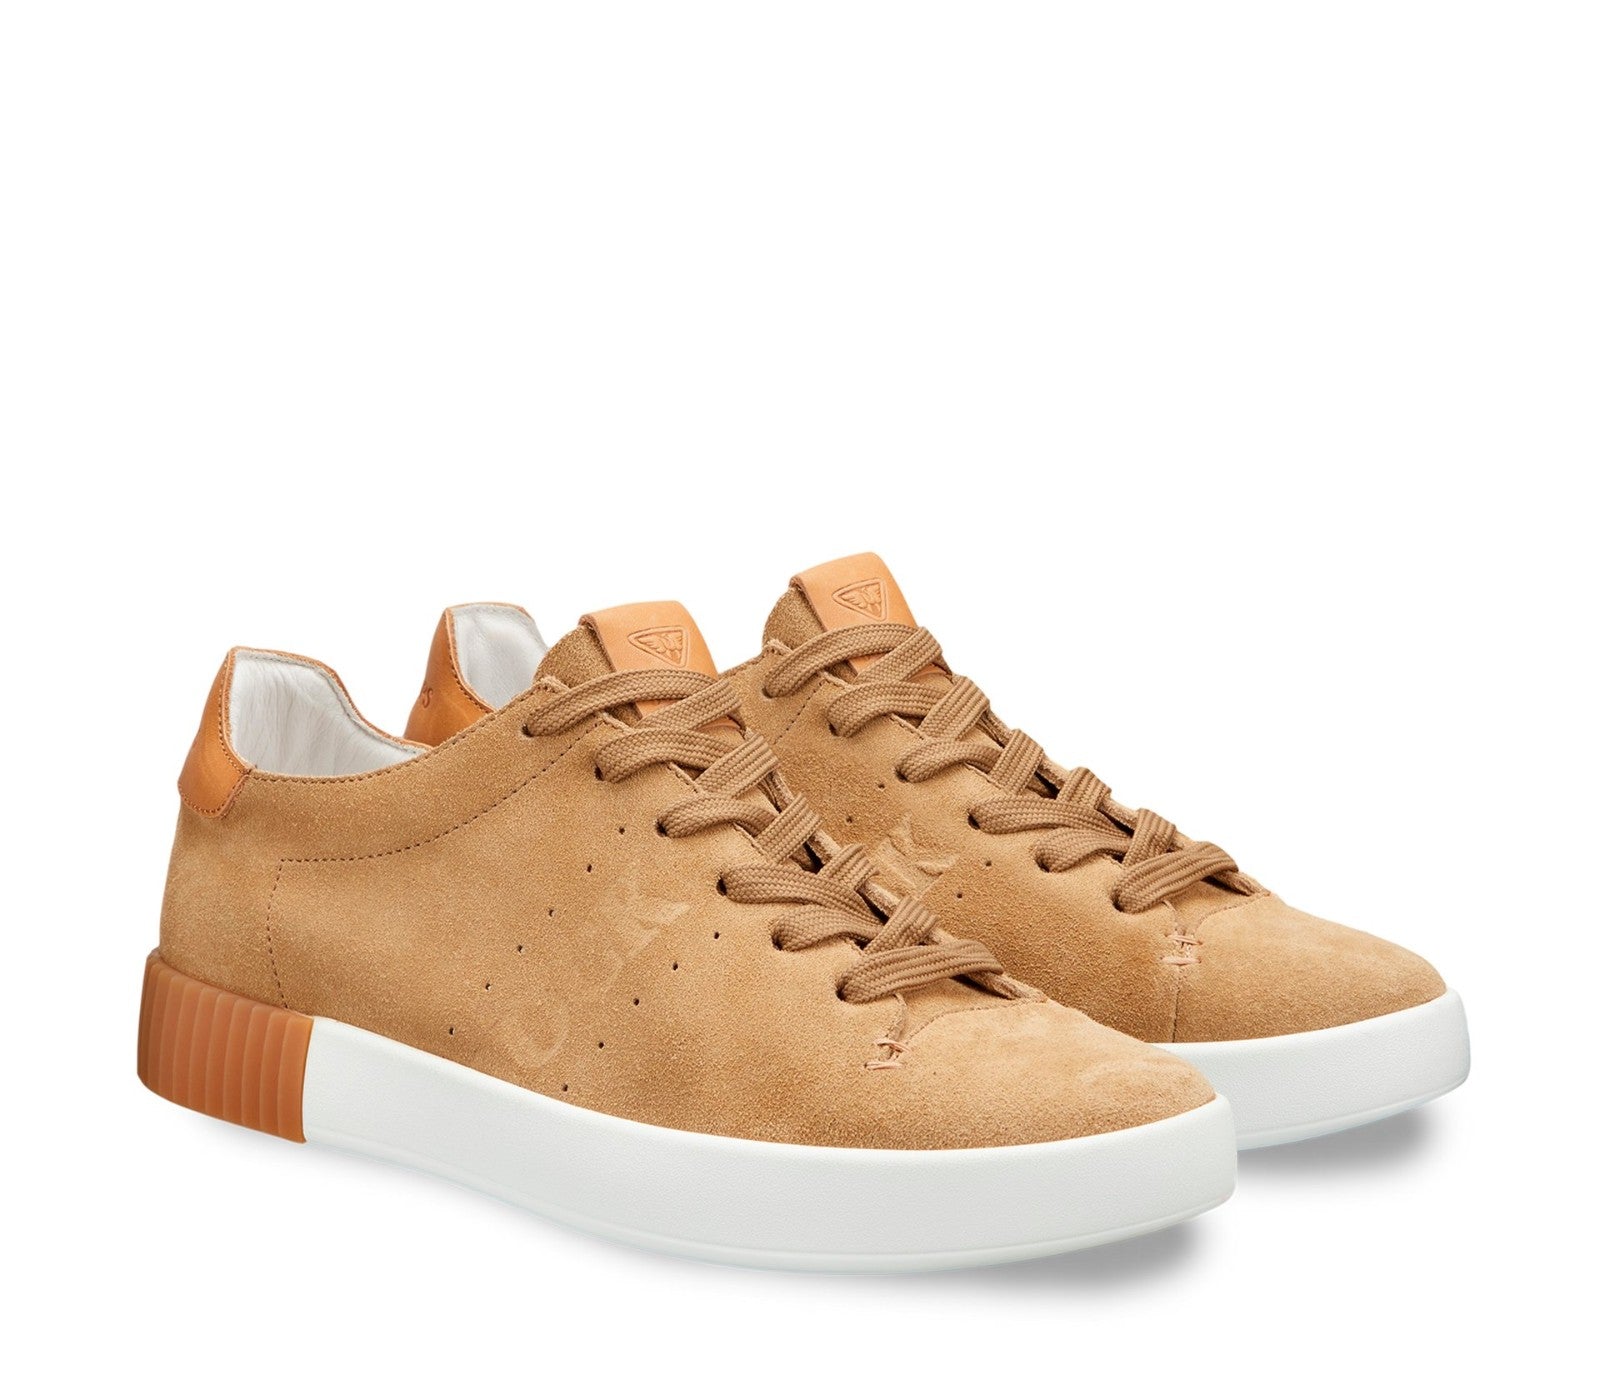 Docksteps men's camel-coloured leather/suede trainers